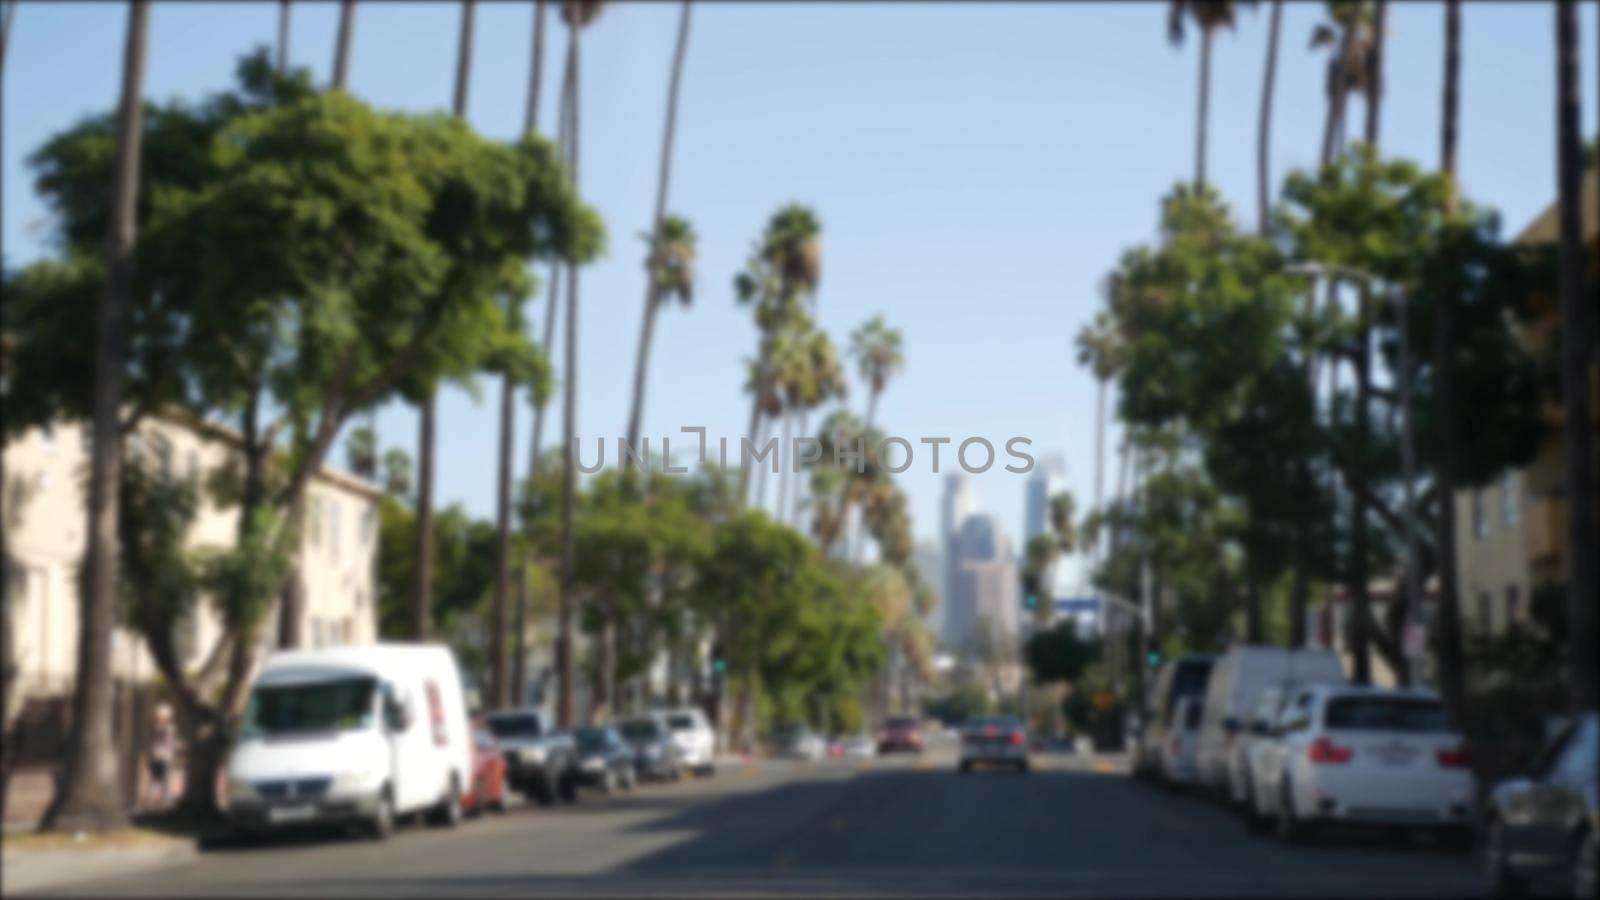 Driving on downtown streets of Los Angeles, California USA. Defocused view from car thru glass windshield on driveway. Blurred road with vehicles in Hollywood. Camera inside auto, LA city aesthetic.